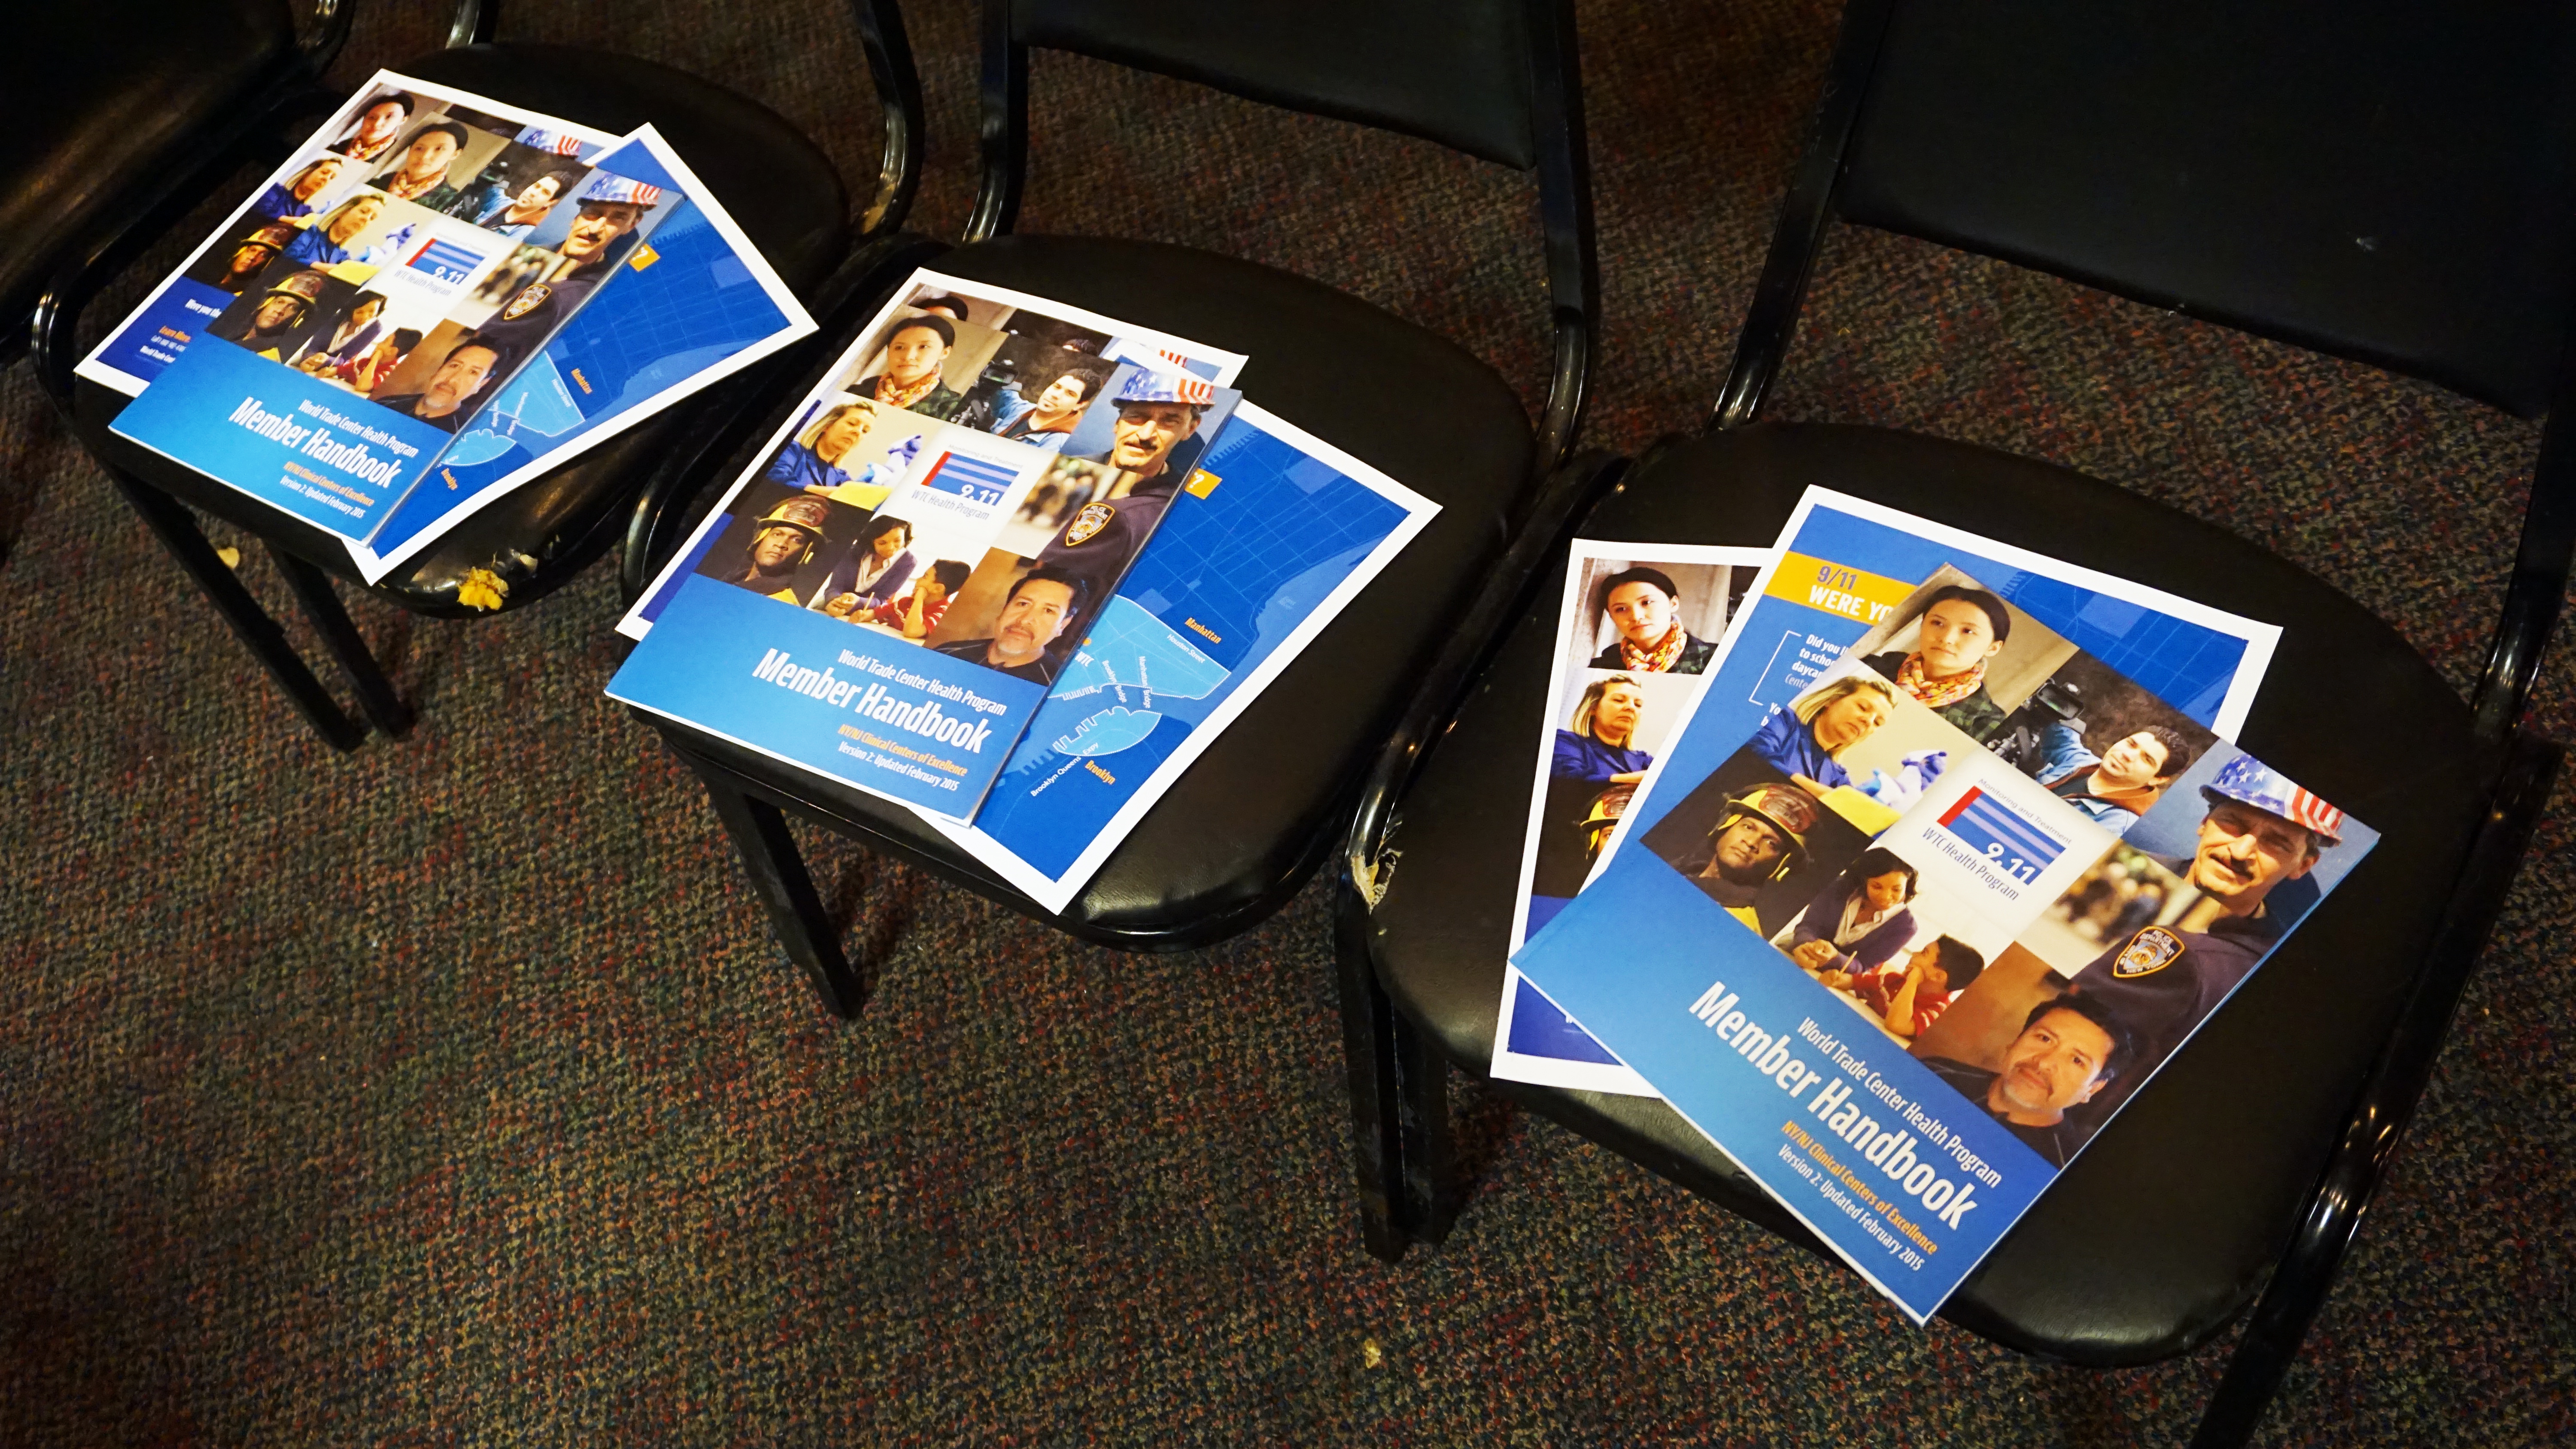 World Trade Center Health Program Member Handbooks are placed on seats for a FealGood Foundation Outreach and Education session to enroll 9/11 responders and survivors into the health program in Philadelphia, Pennsylvania on April 1, 2016. Photo by: Suneet Mahandru